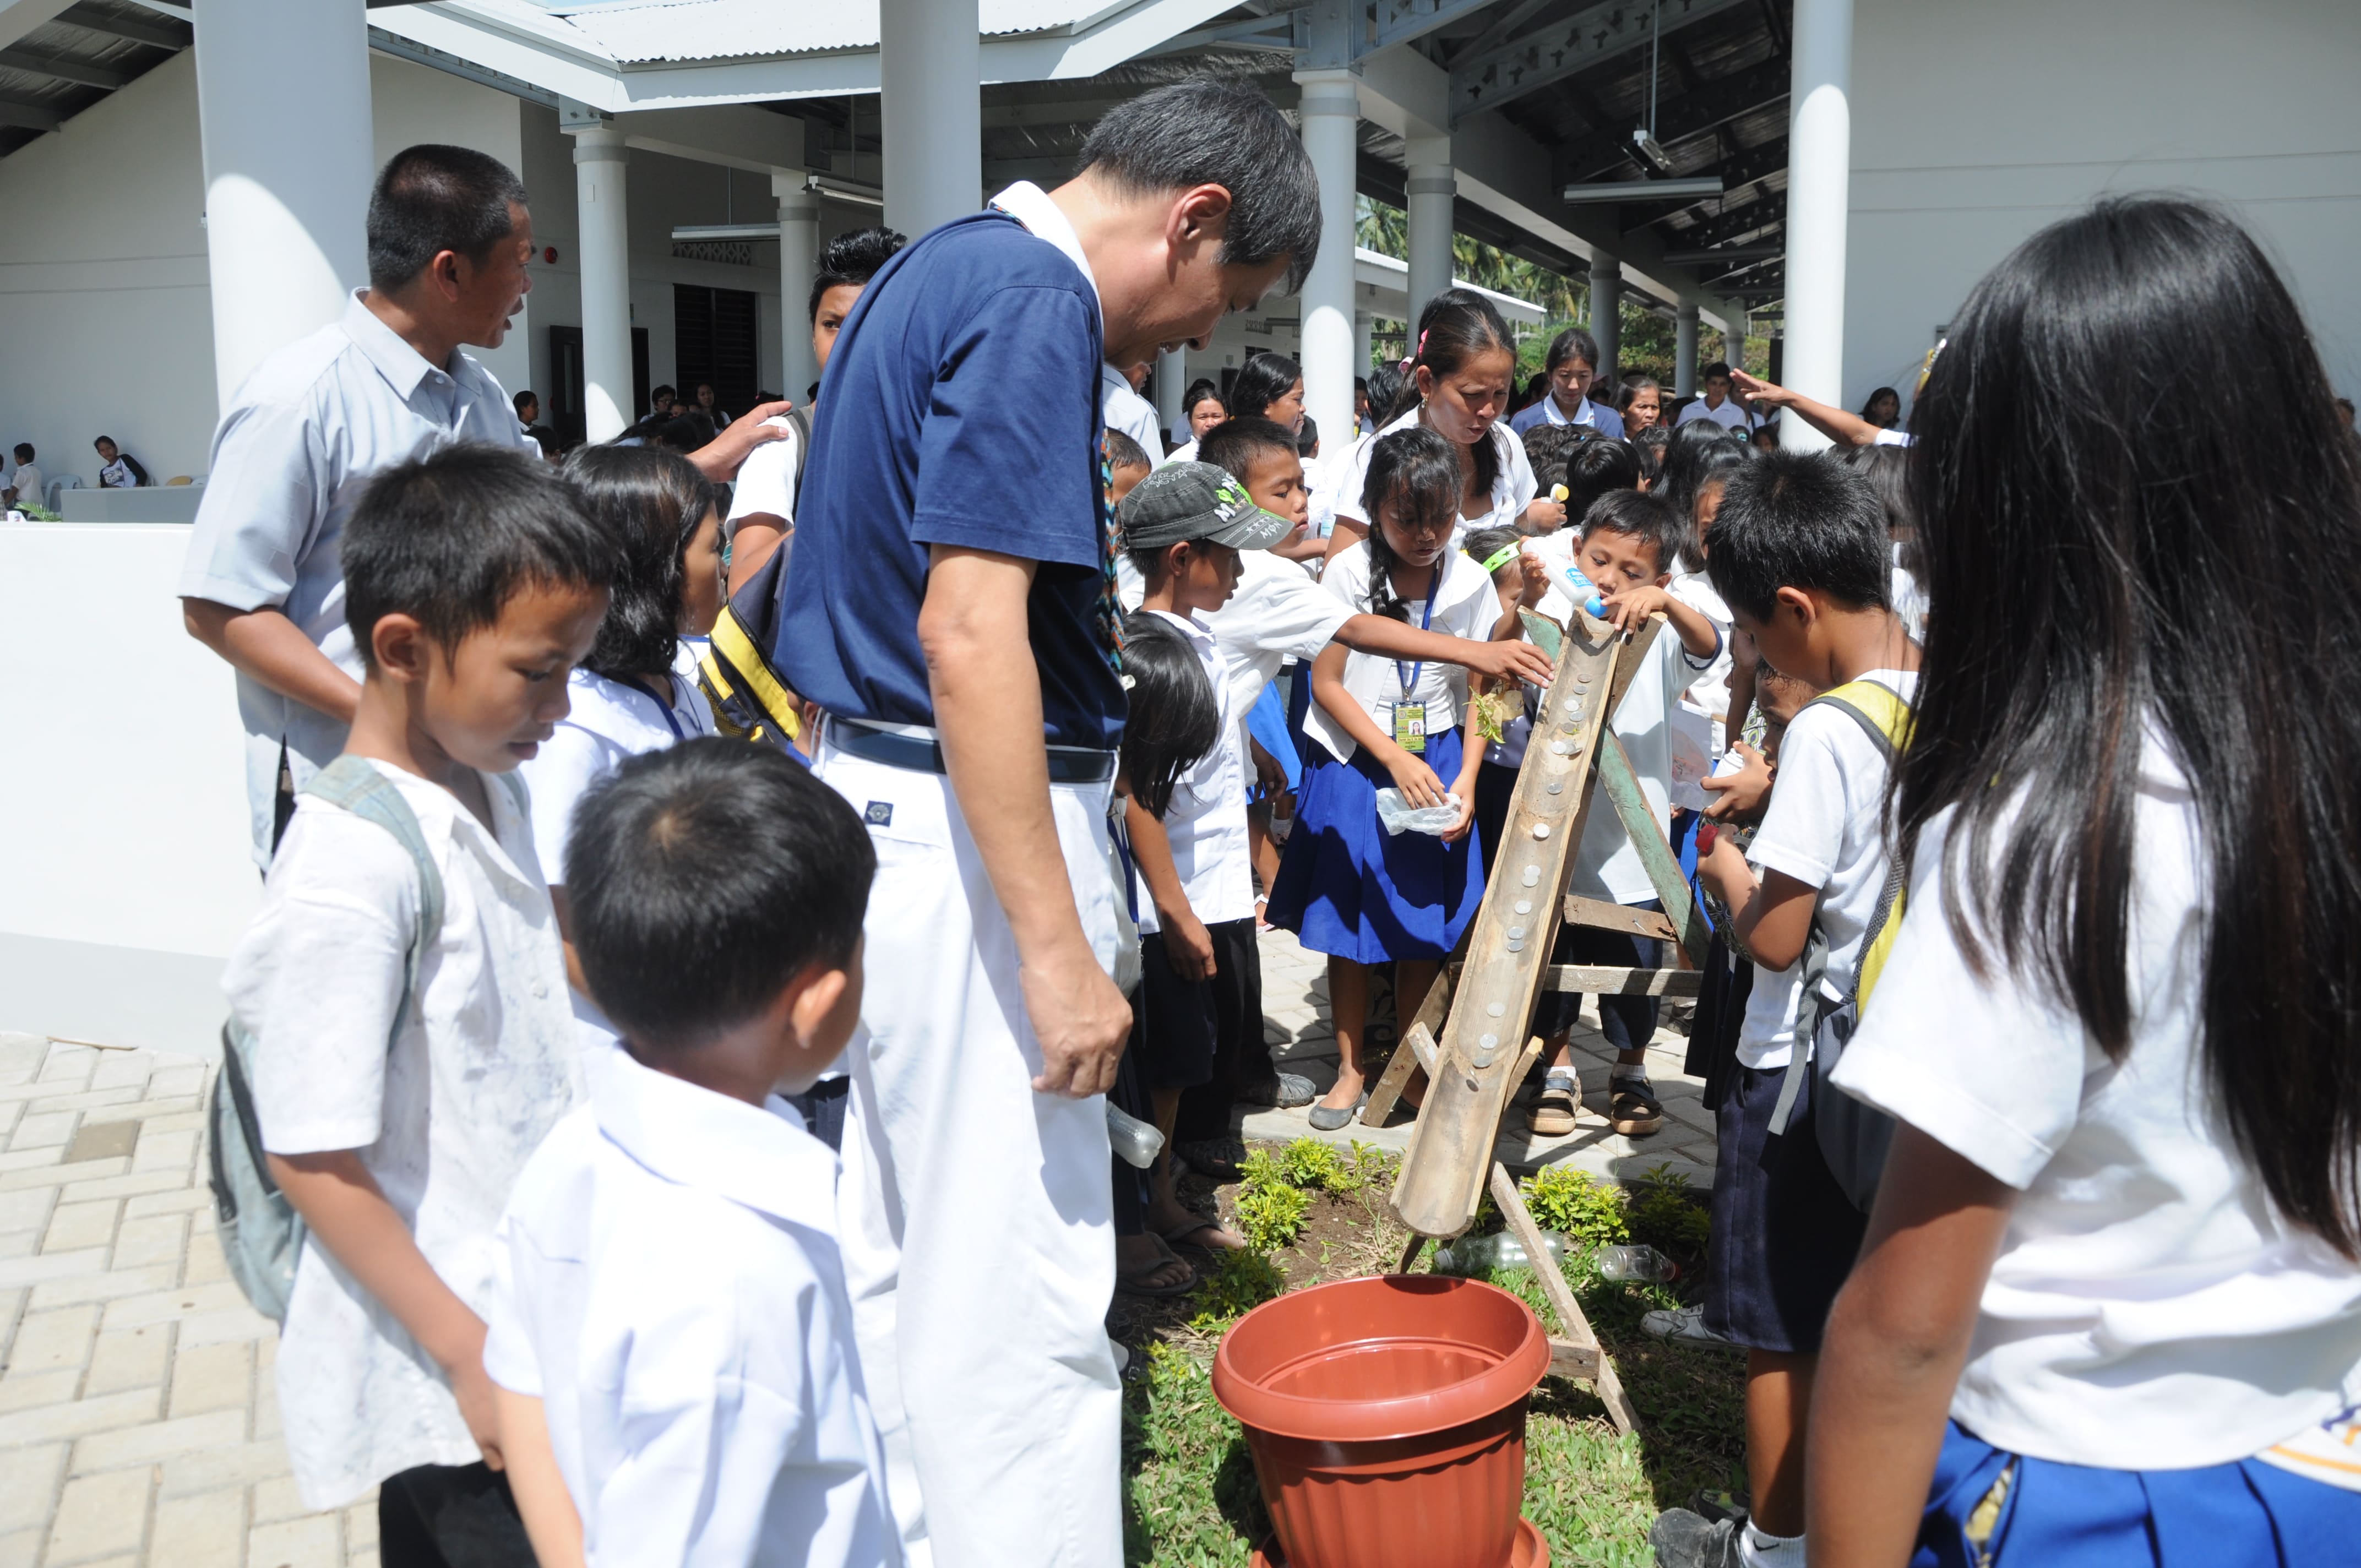 Mangayon Elementary School students place donations on a bamboo slide at the turnover ceremony of their newly built school on December 1, 2014.